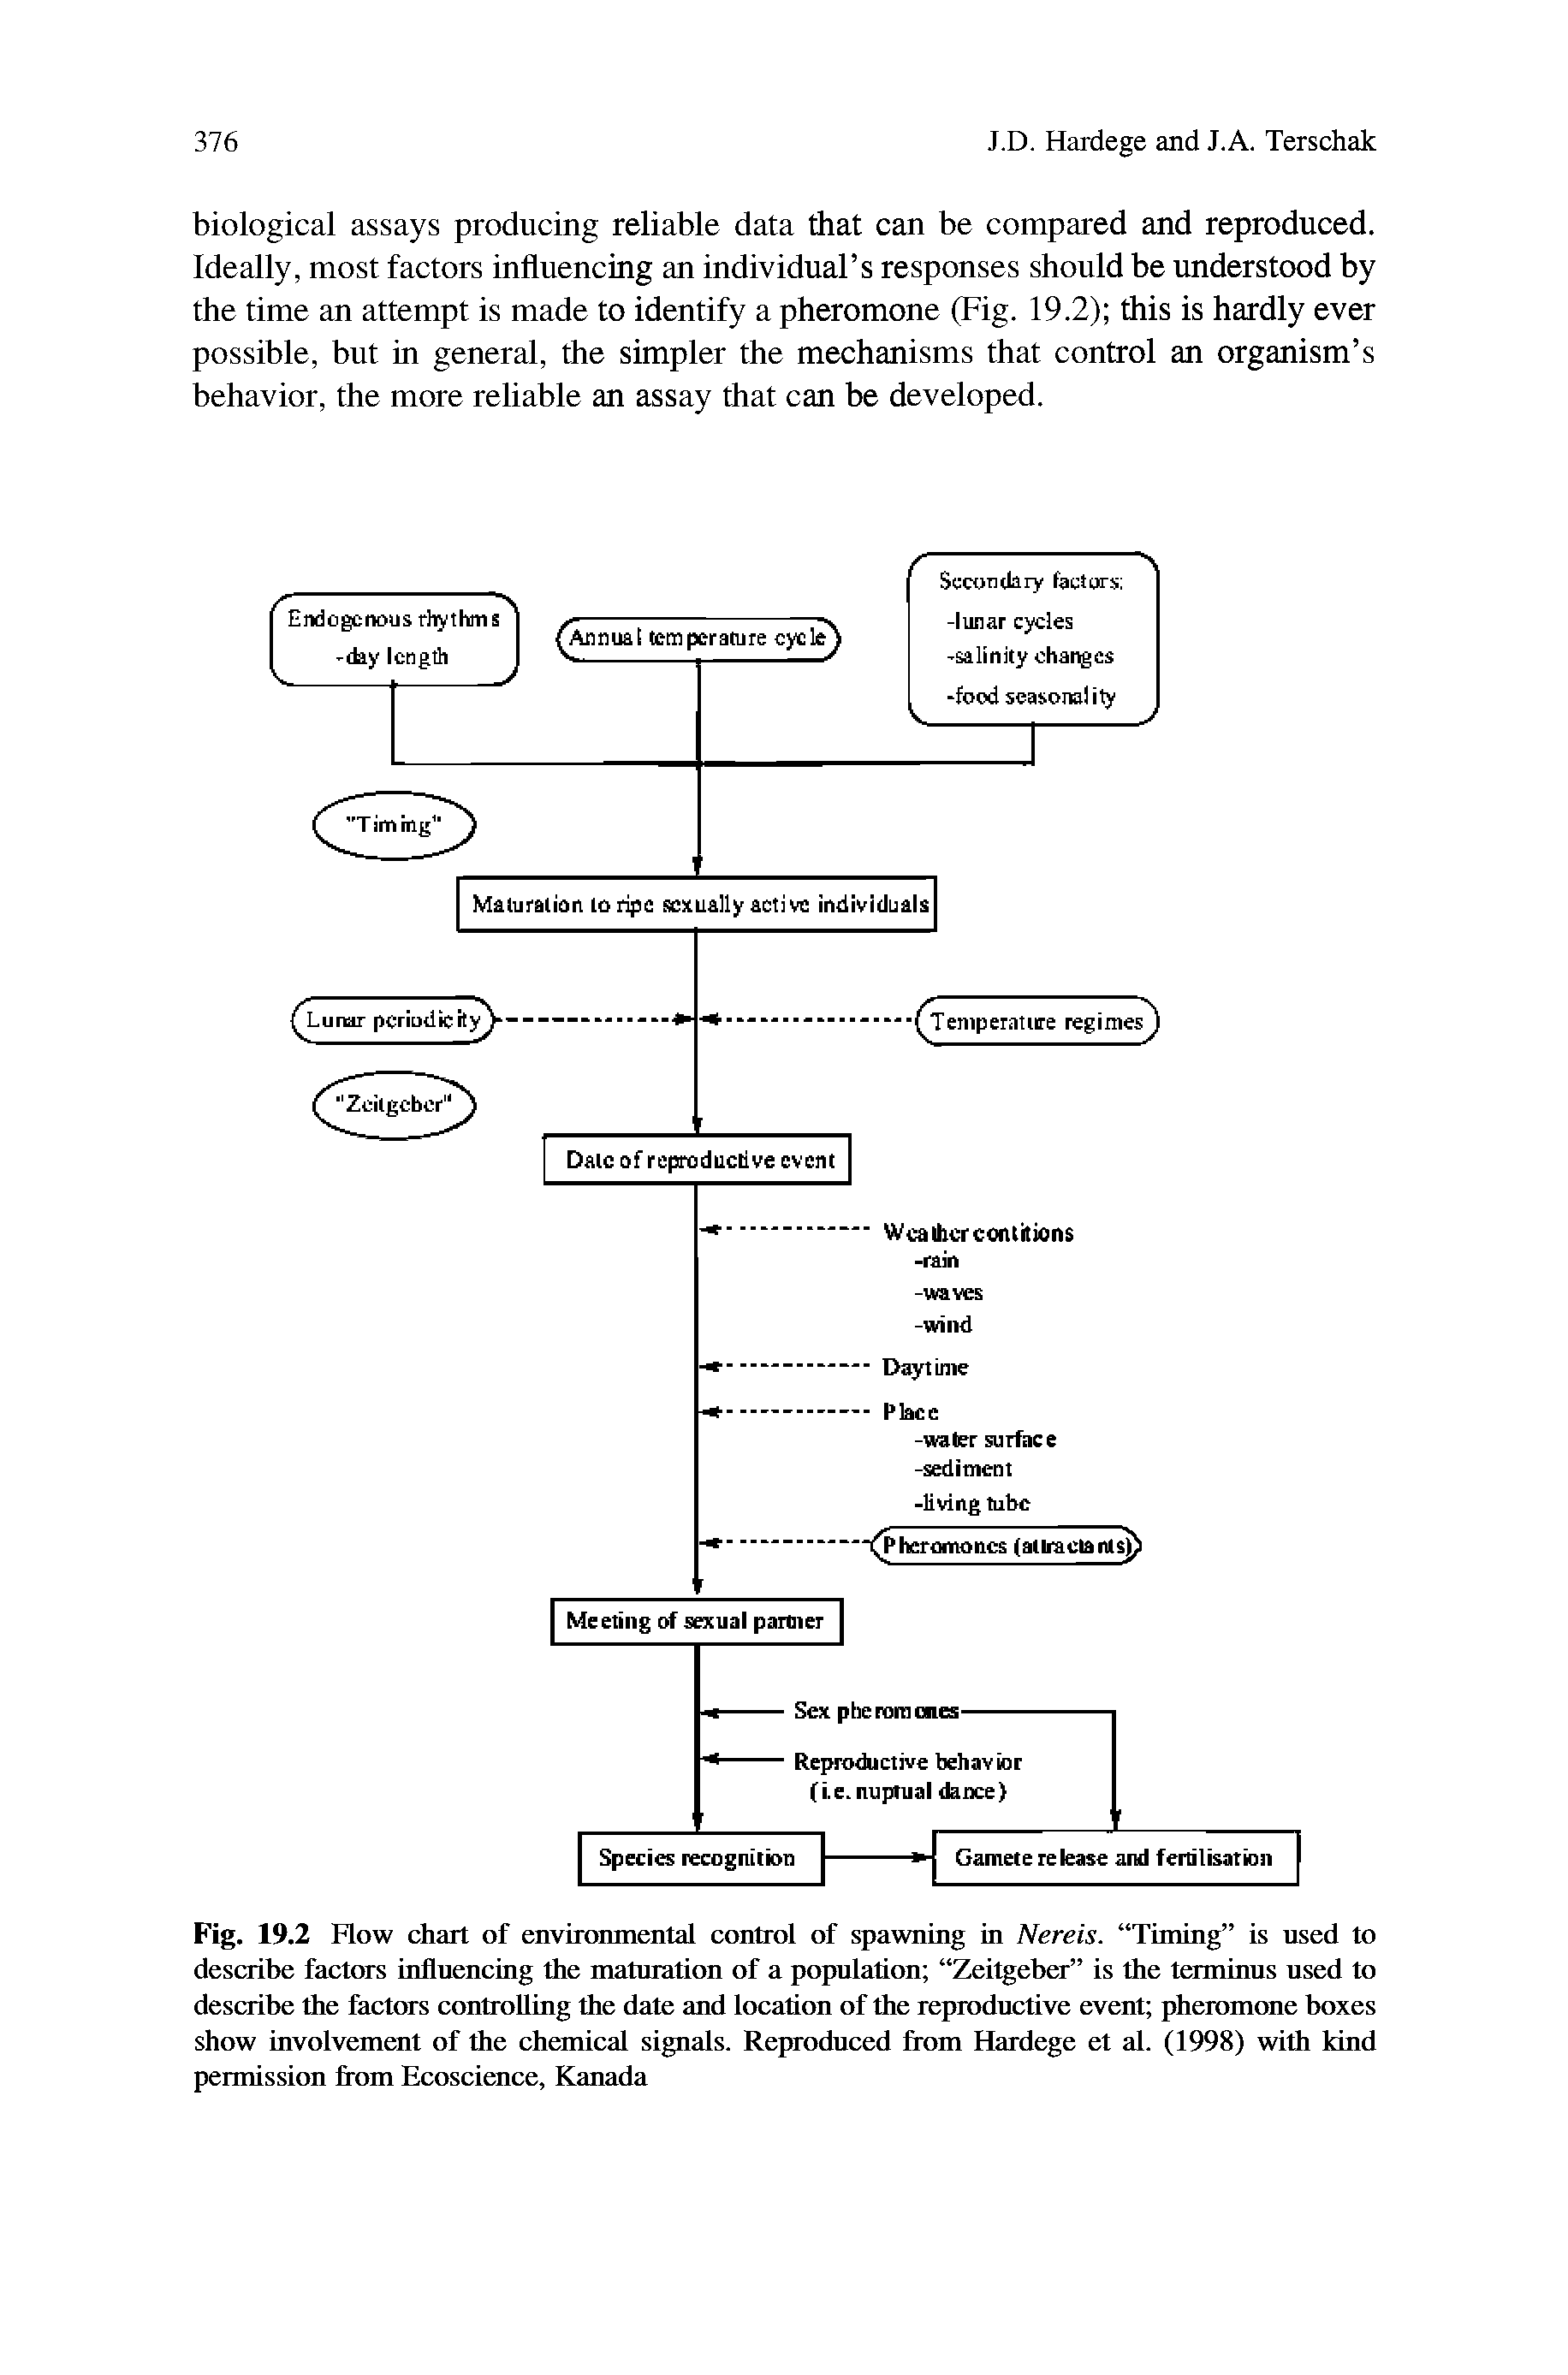 Fig. 19.2 Flow chart of environmental control of spawning in Nereis. Timing is used to describe factors influencing the maturation of a population Zeitgeber is the terminus used to describe the factors controlling the date and location of the reproductive event pheromone boxes show involvement of the chemical signals. Reproduced from Hardege et al. (1998) with kind permission from Ecoscience, Kanada...